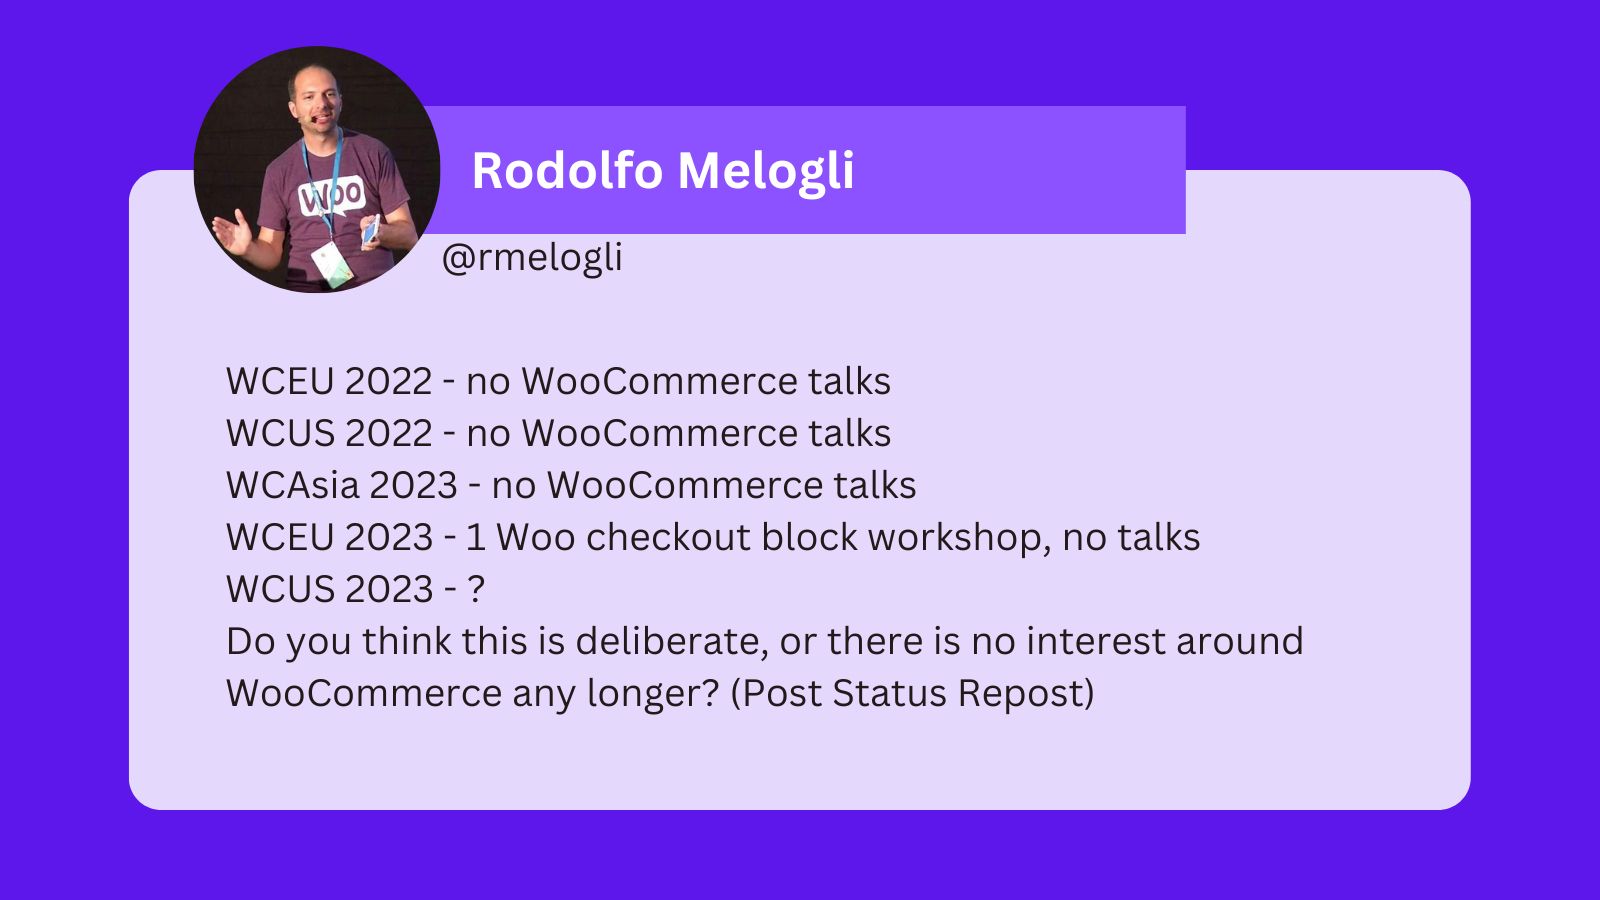 WCEU 2022 - no WooCommerce talks, WCUS 2022 - no WooCommerce talks, WCAsia 2023 - no WooCommerce talks WCEU 2023 - 1 Woo checkout block workshop, no talks, WCUS 2023 - ?, Do you think this is deliberate, or there is no interest around WooCommerce any longer? (Post Status Repost)